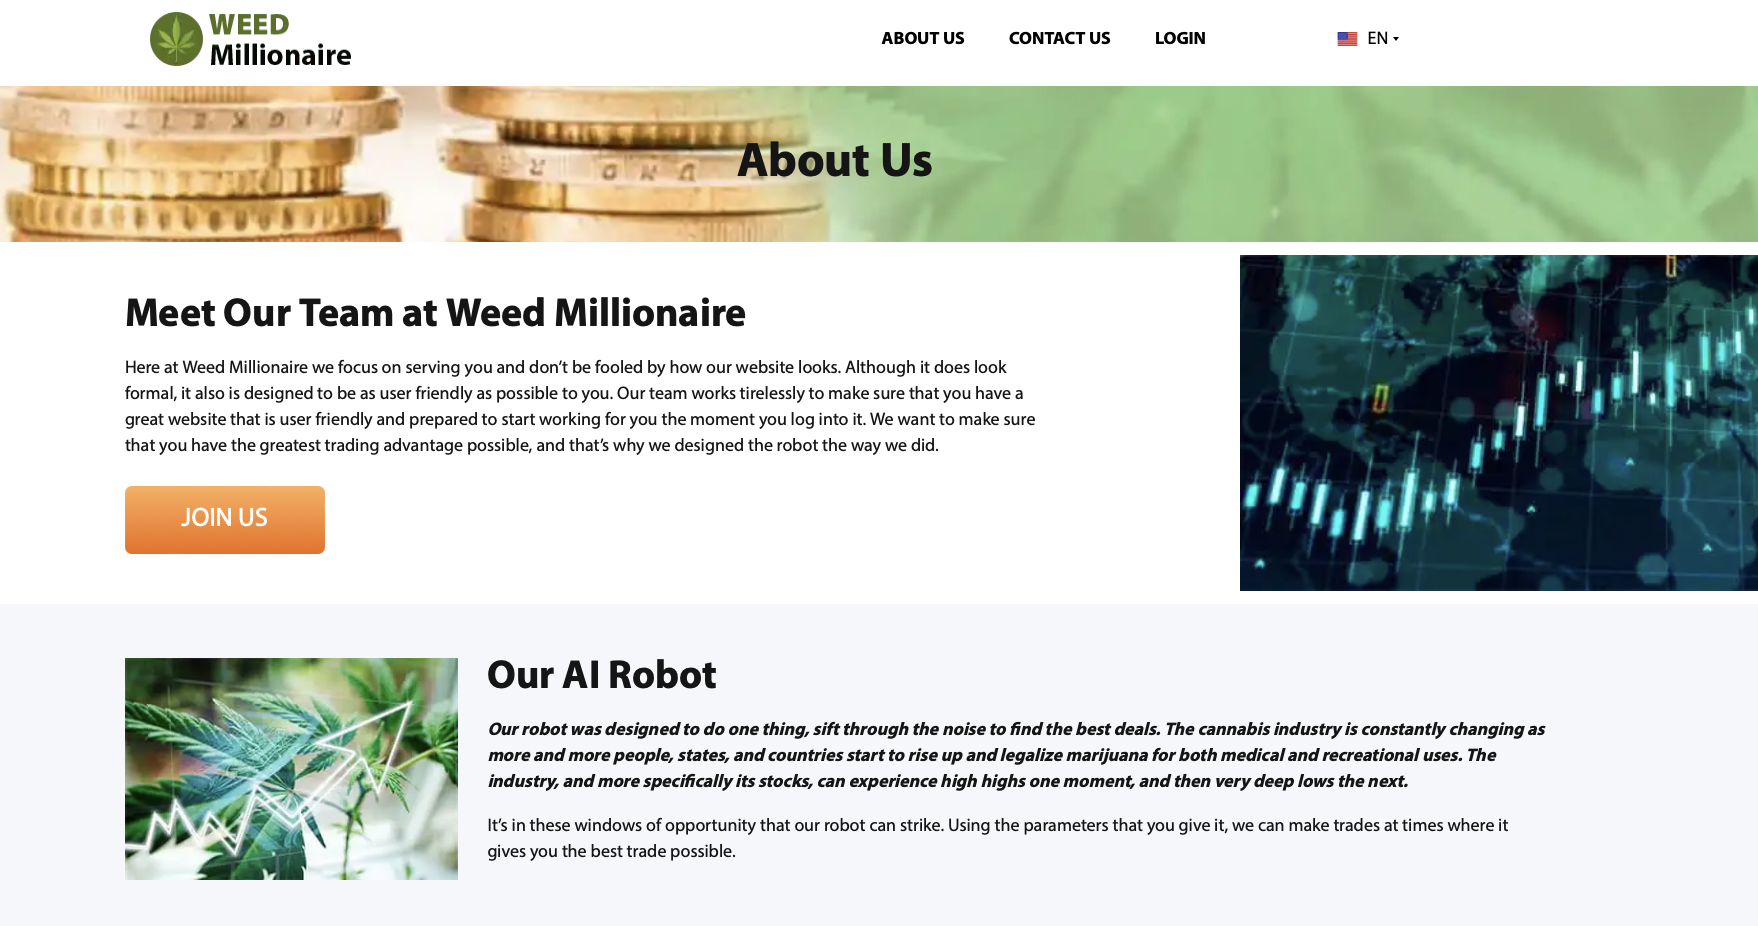 Information about Weed Millionaire